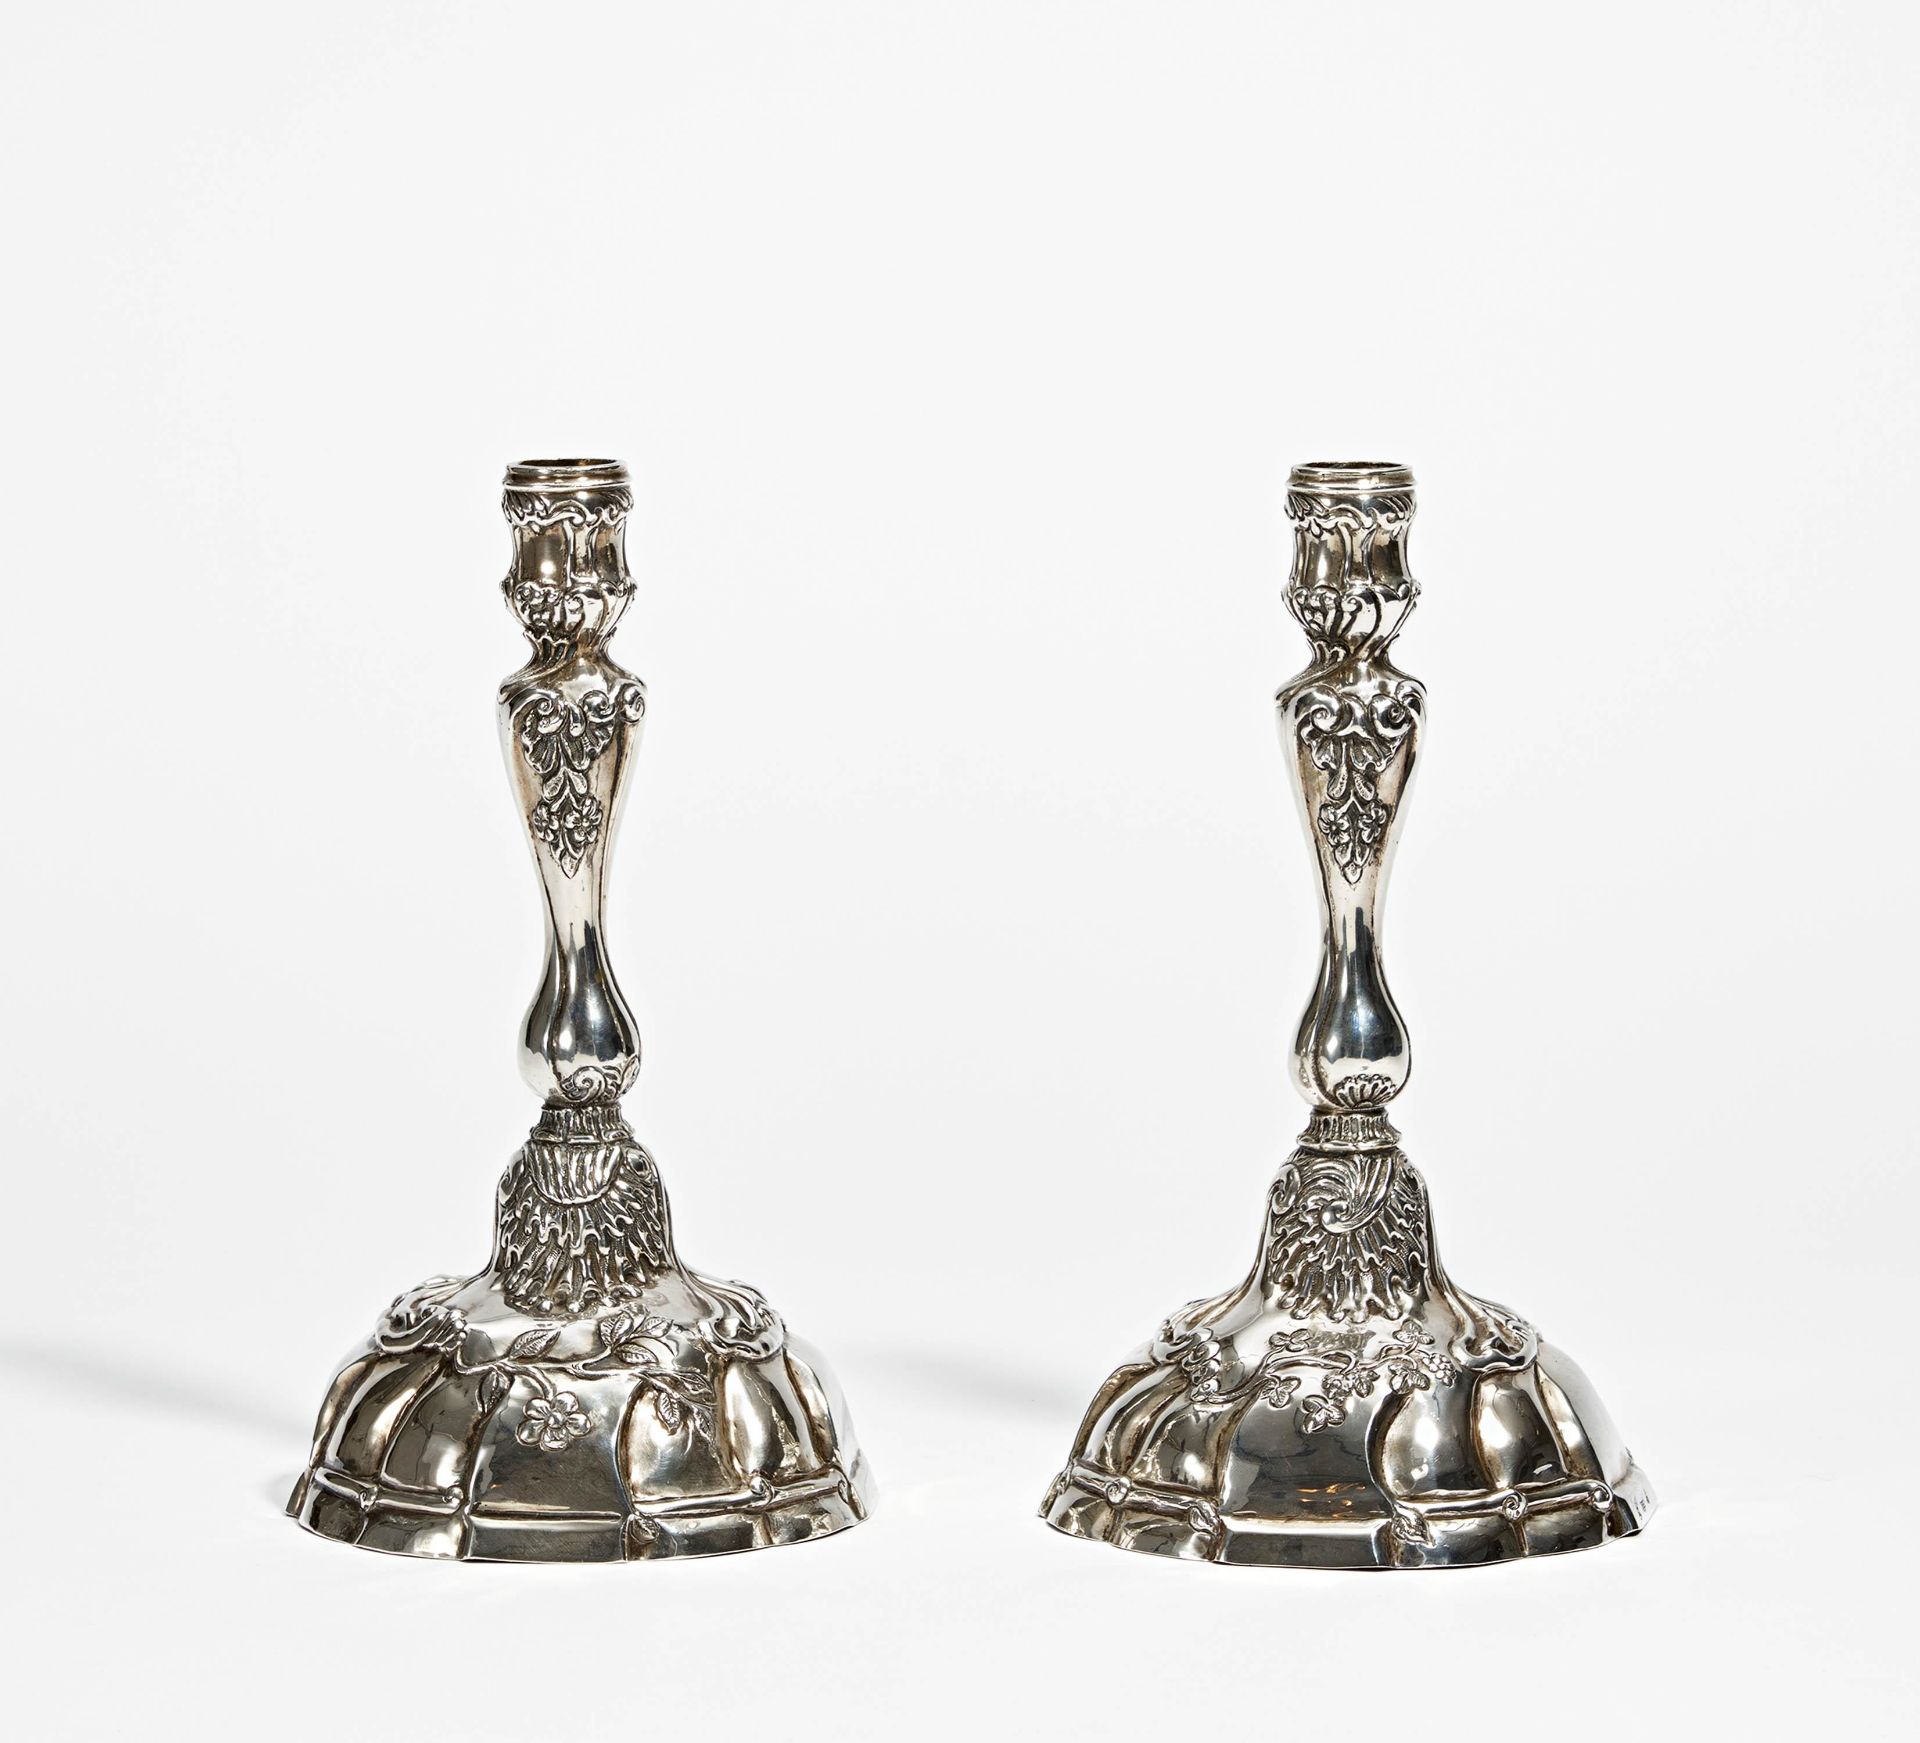 Pair of candlesticks with vine and flower décor